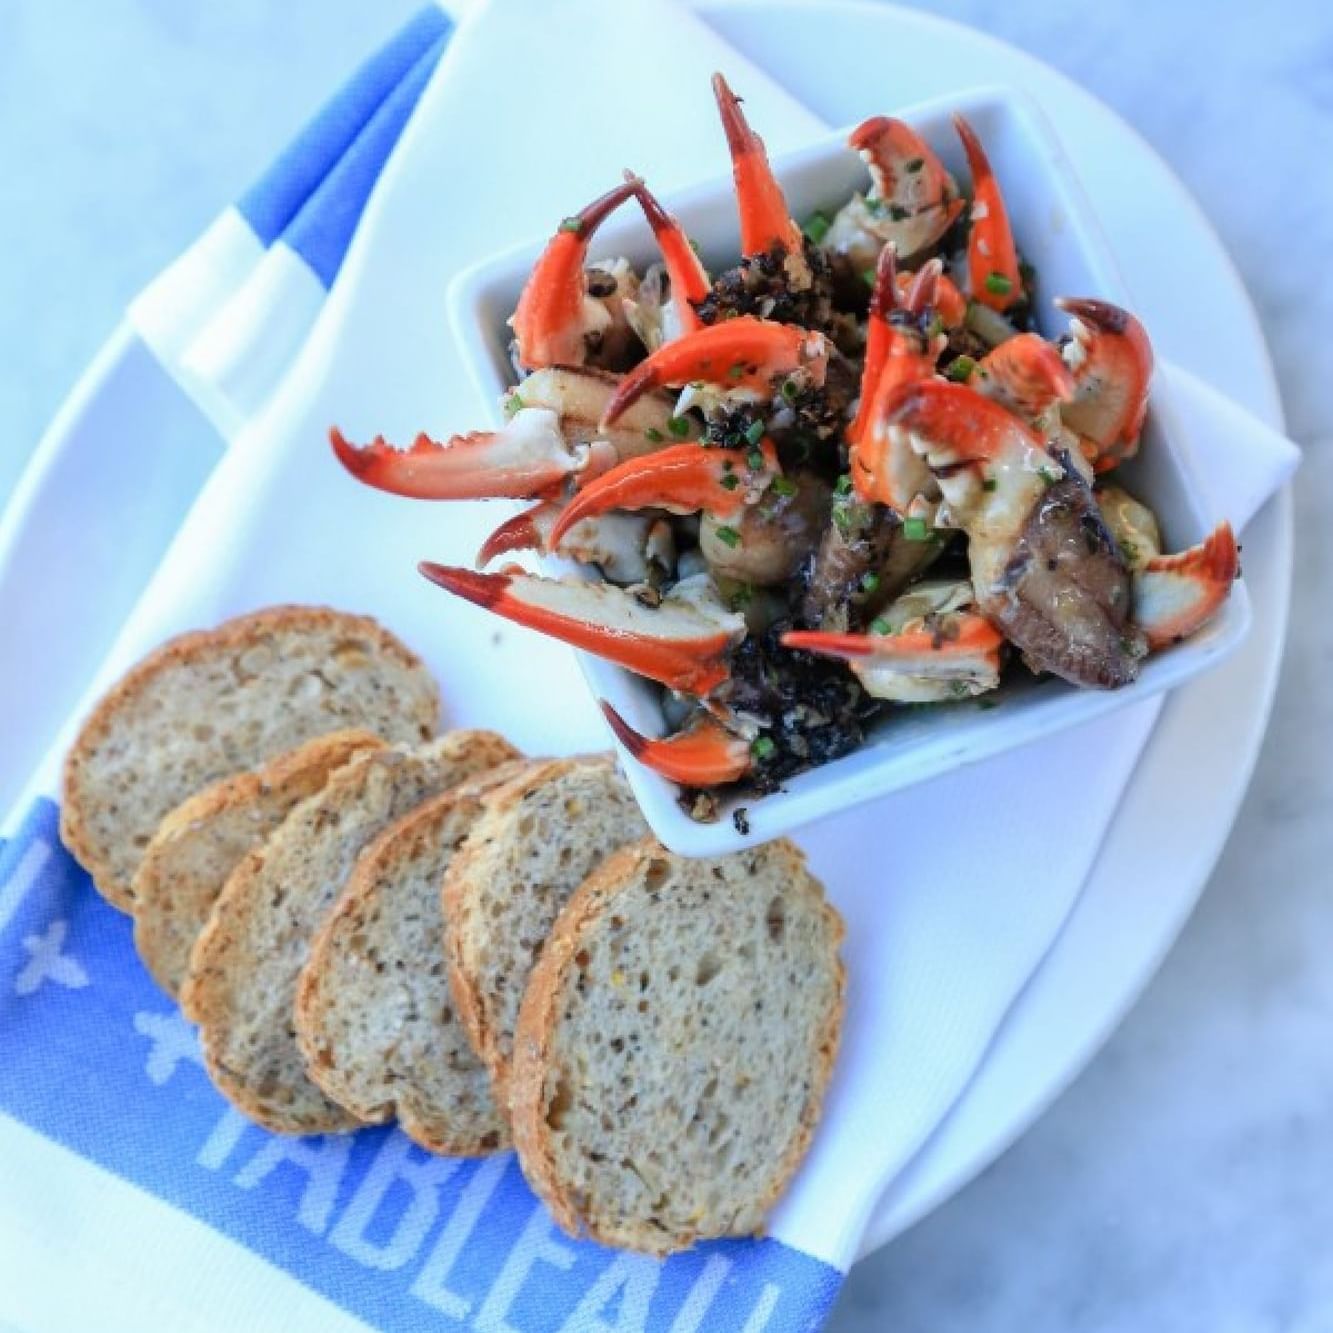 Crabs and bread served at Tableau near Hotel St. Pierre